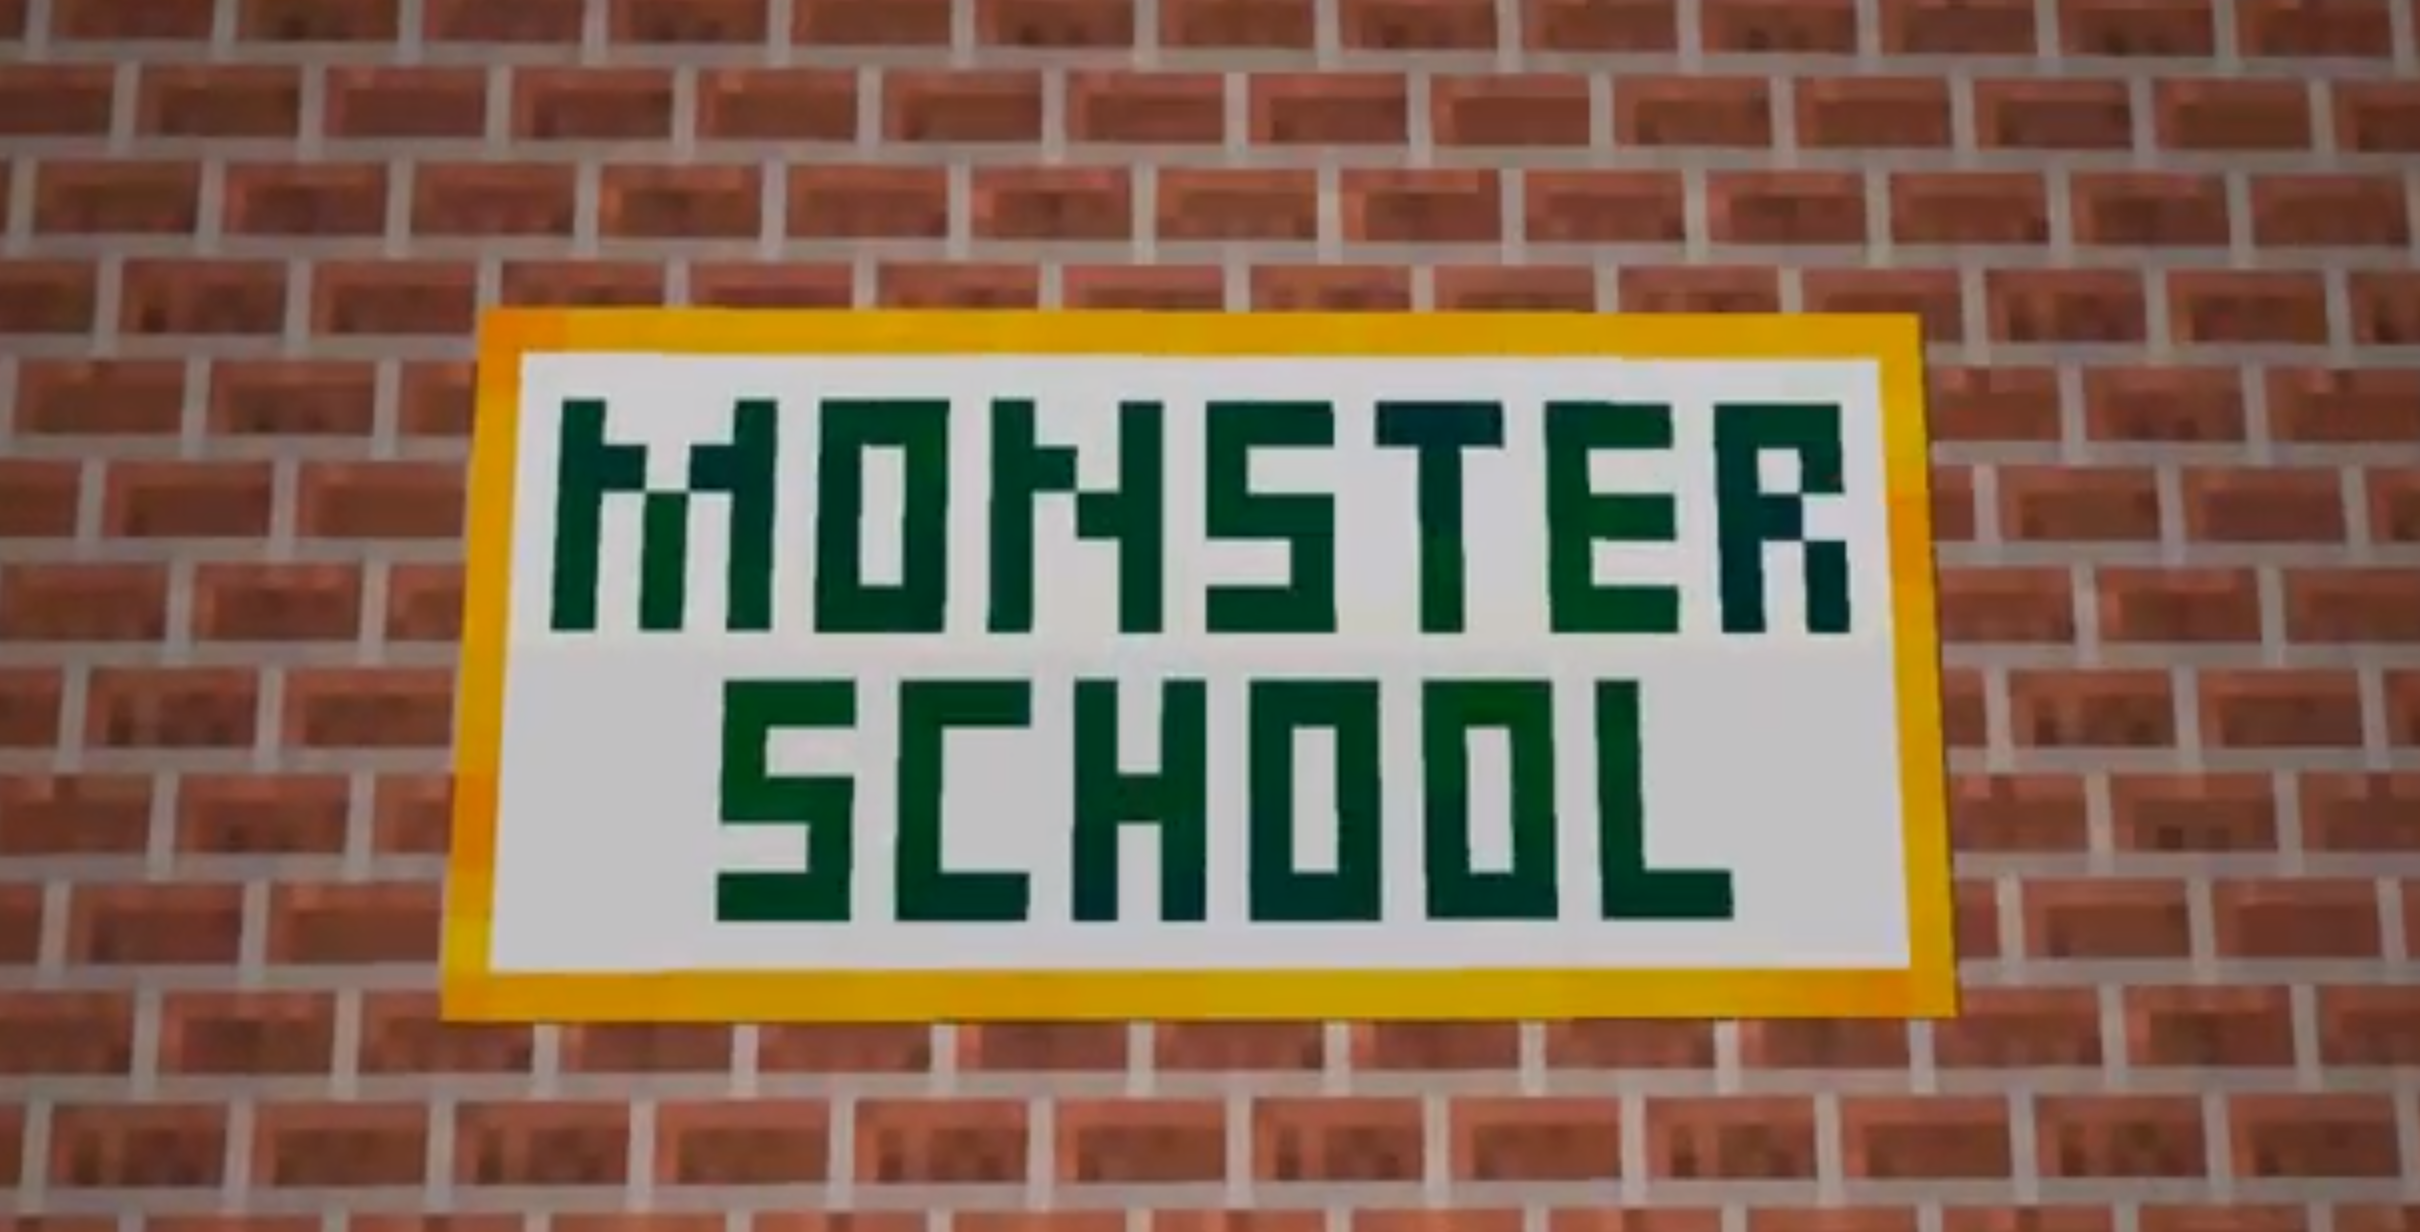 minecraft monster city school map for 1.12.2